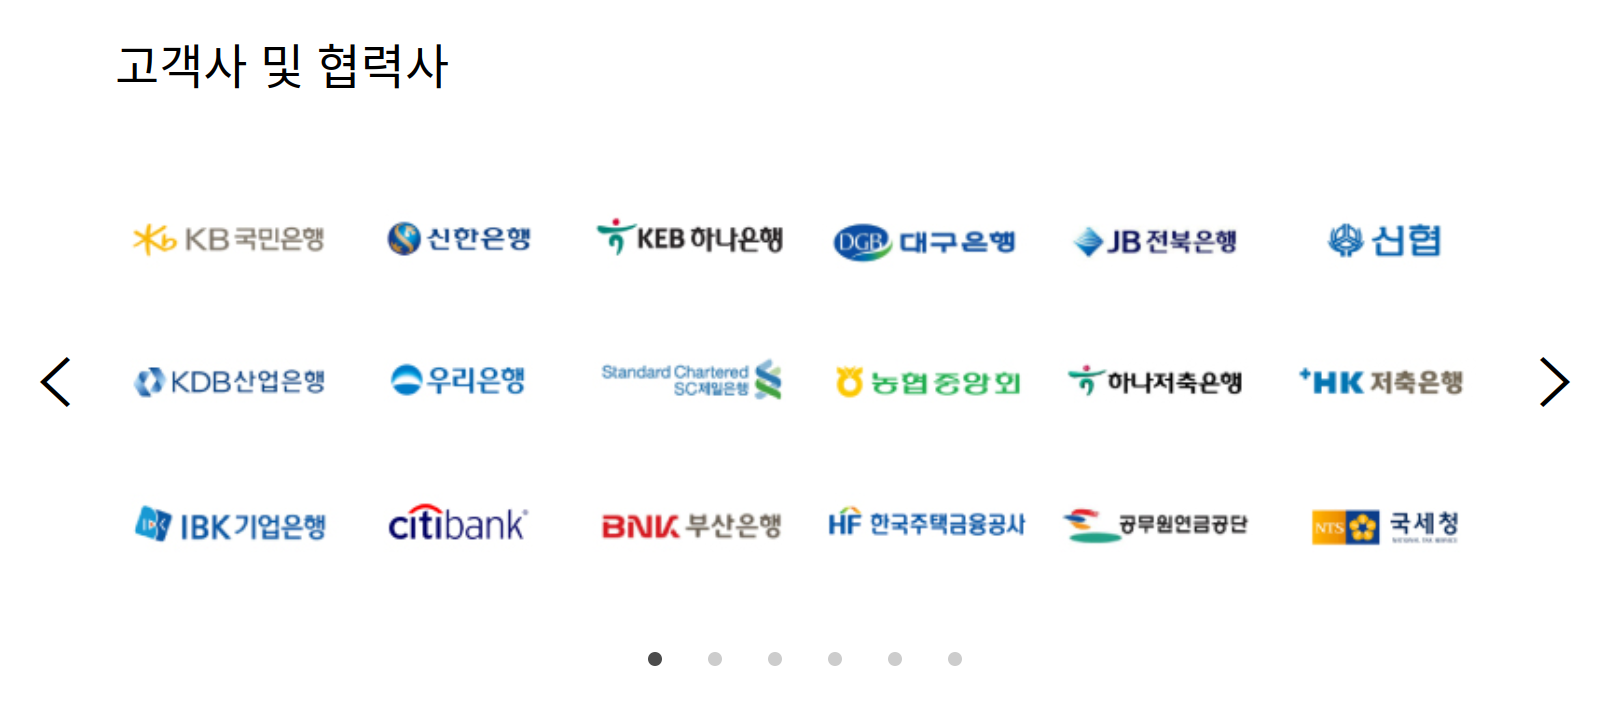 A large list of company logos including Citibank in a section titled “Customers and Partners” in Korean.